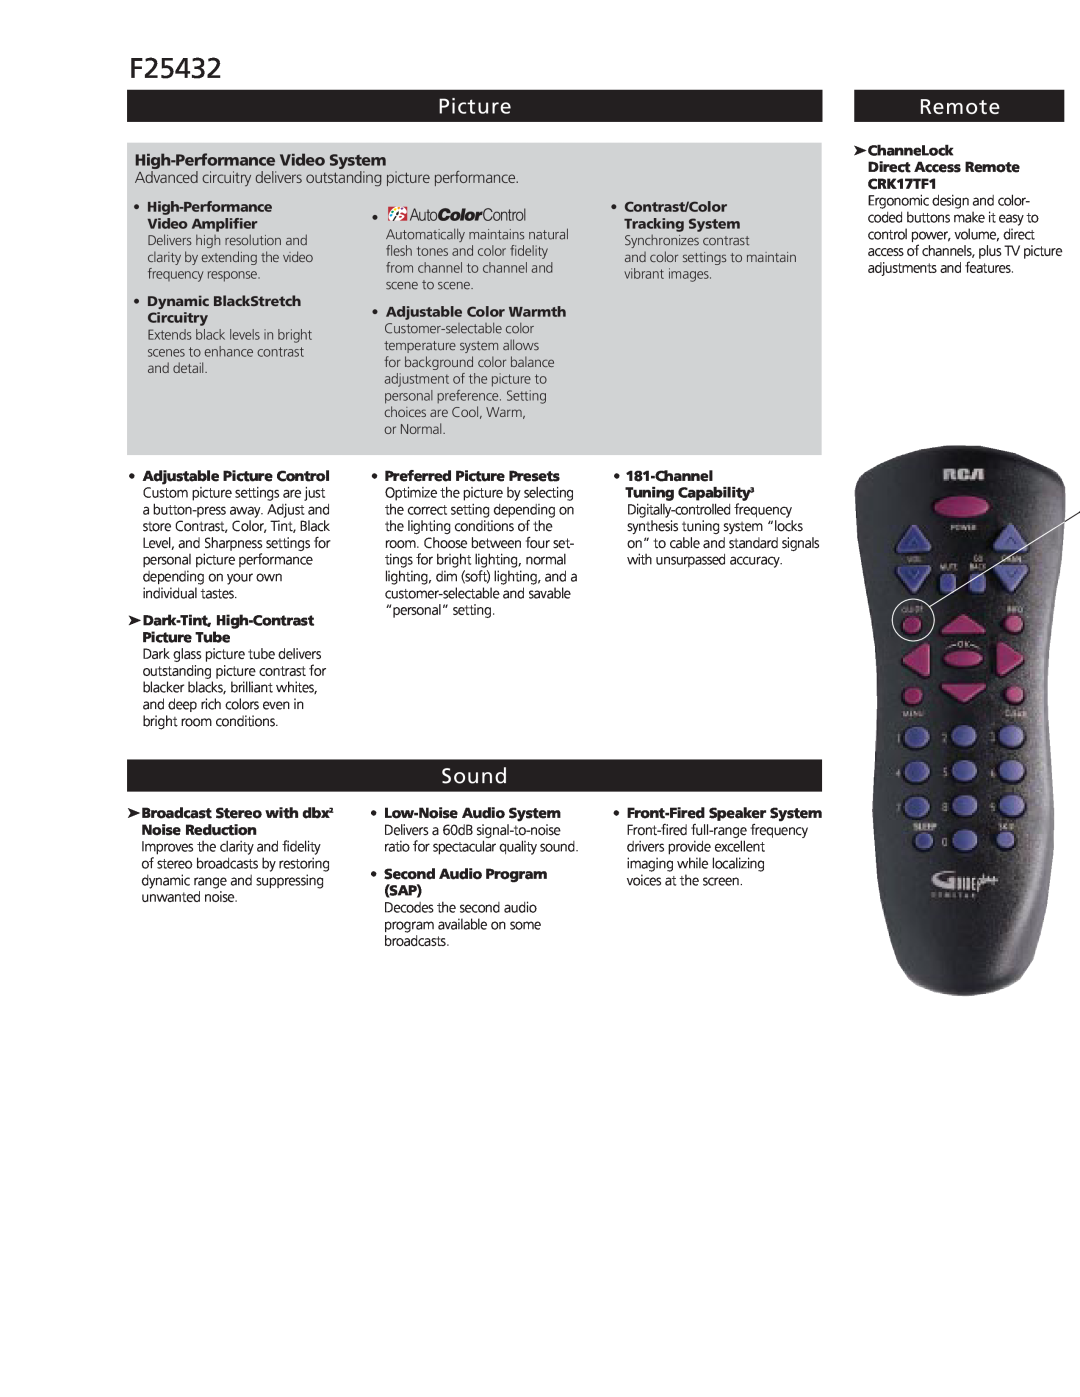 RCA F25432 Picture, Remote, Sound, High-Performance Video System, or Normal, and color settings to maintain vibrant images 